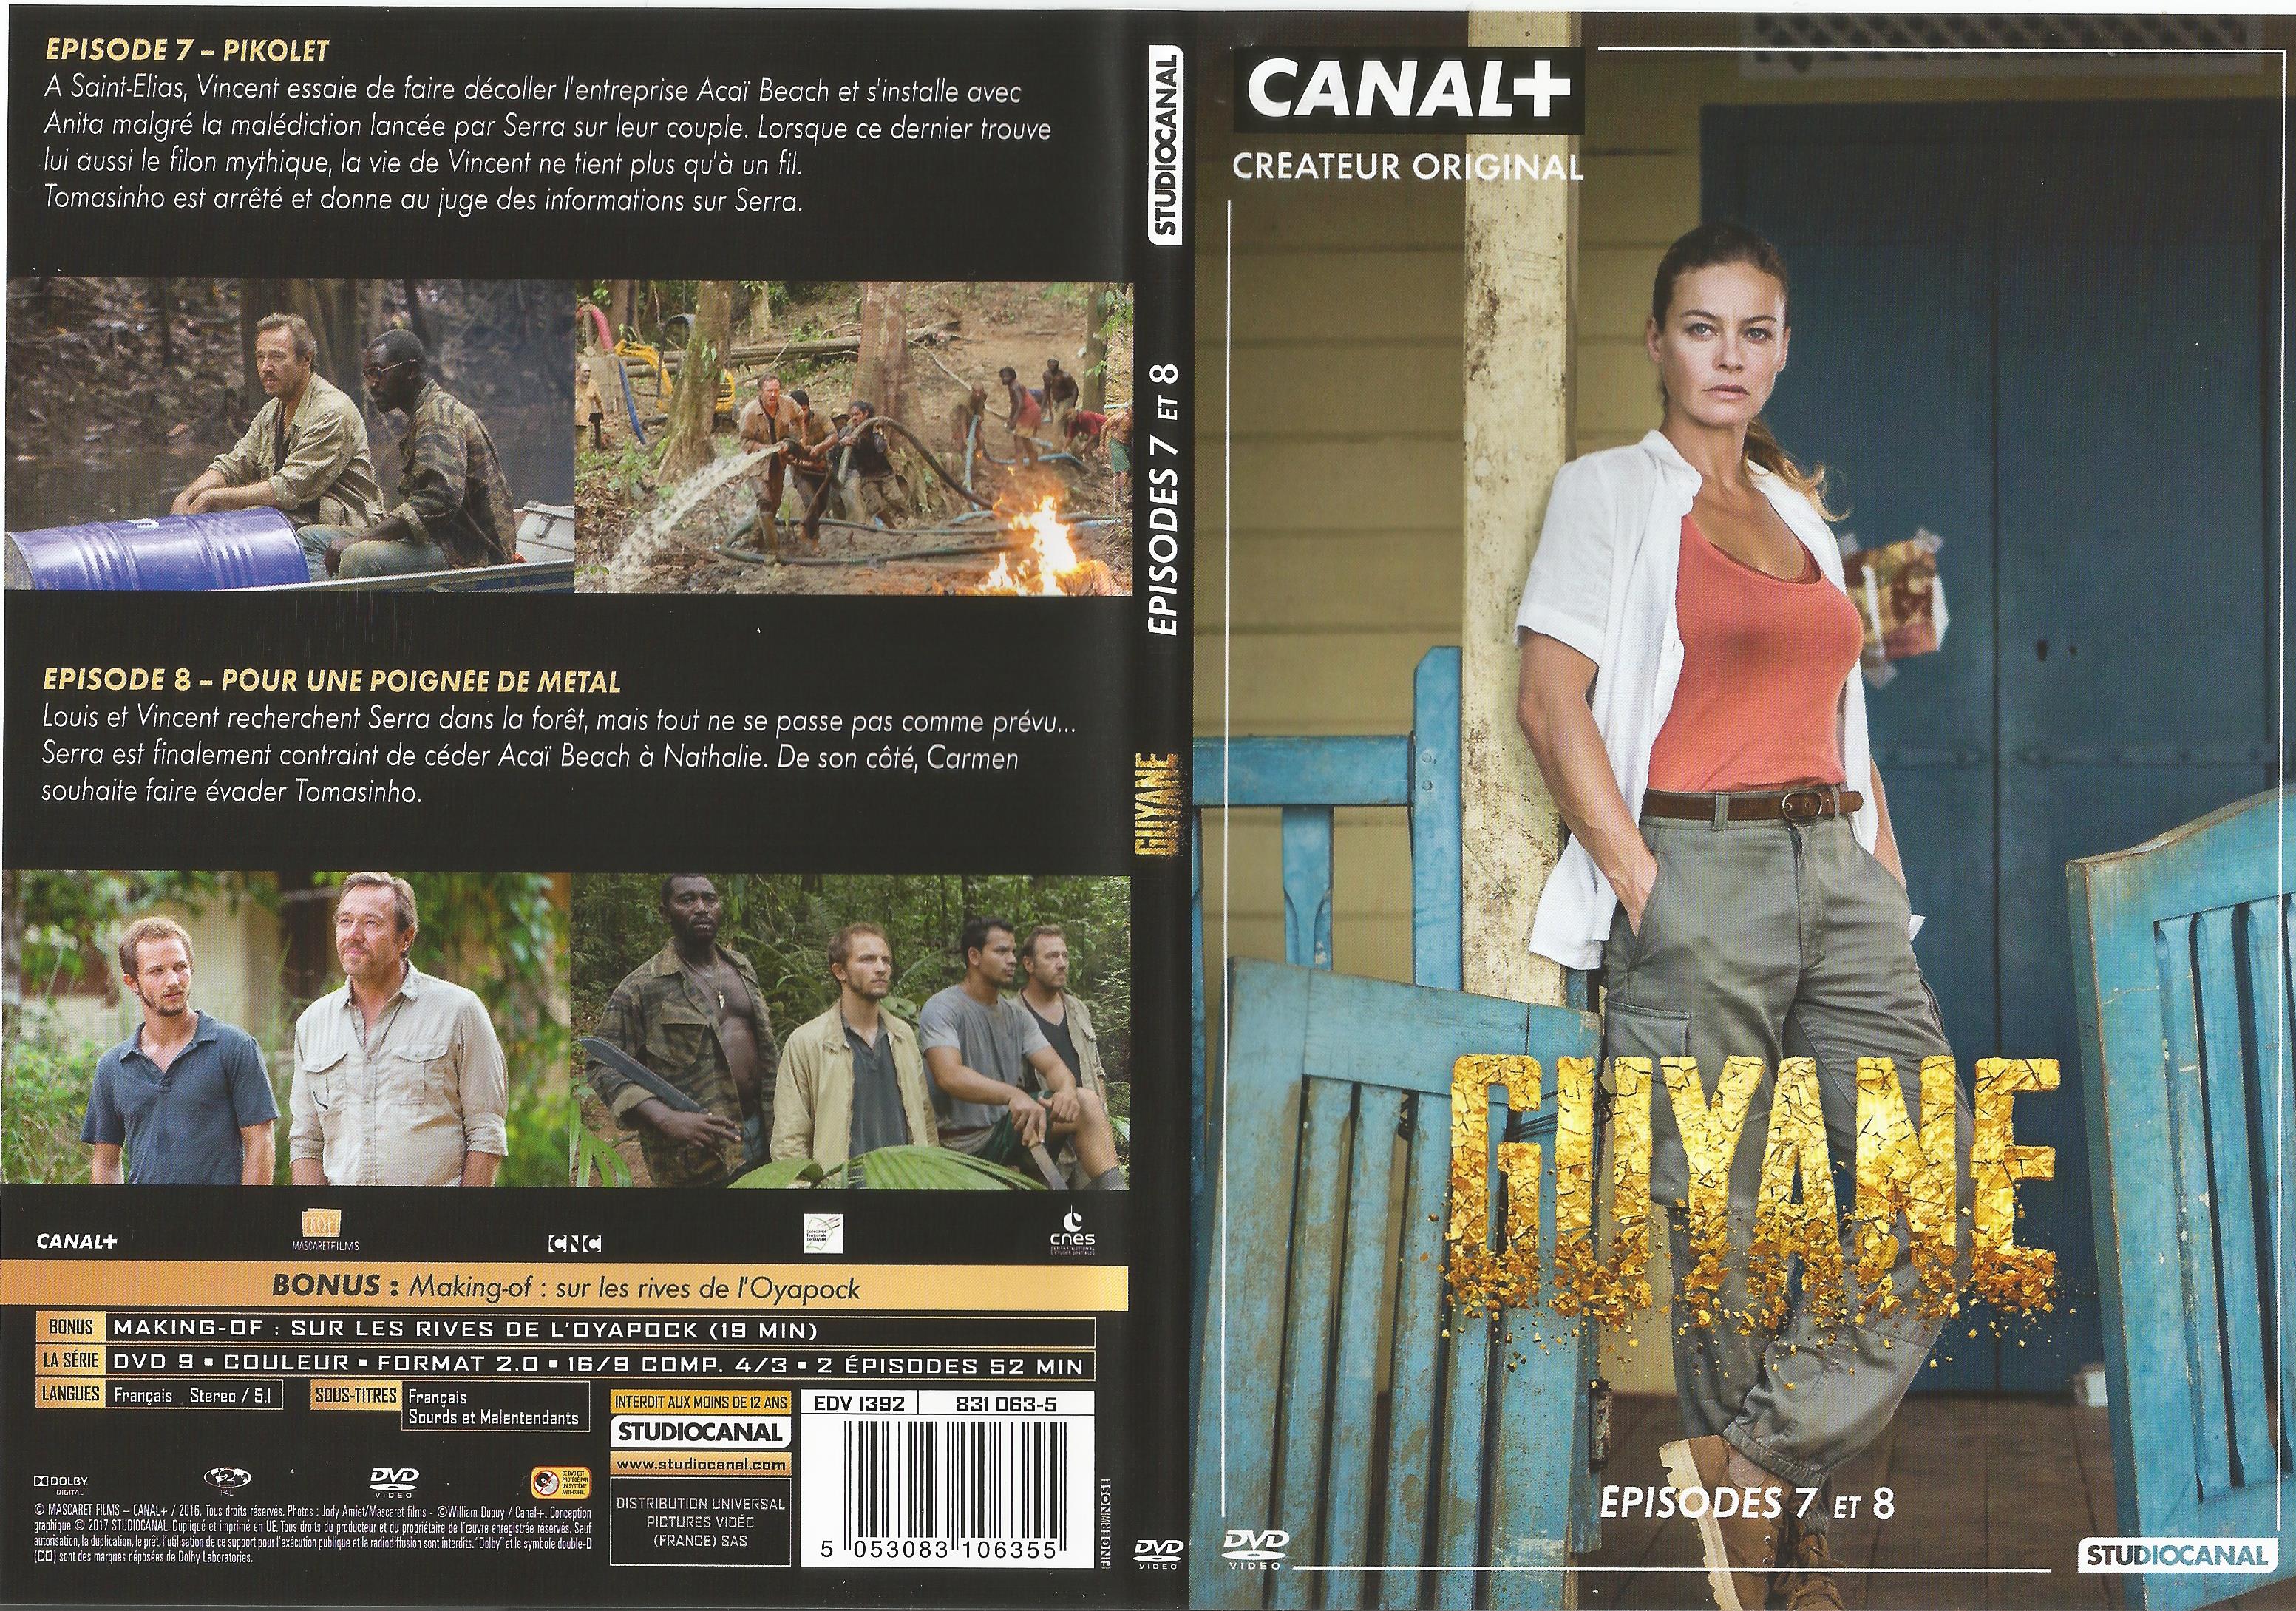 Jaquette DVD Guyane Ep 7-8